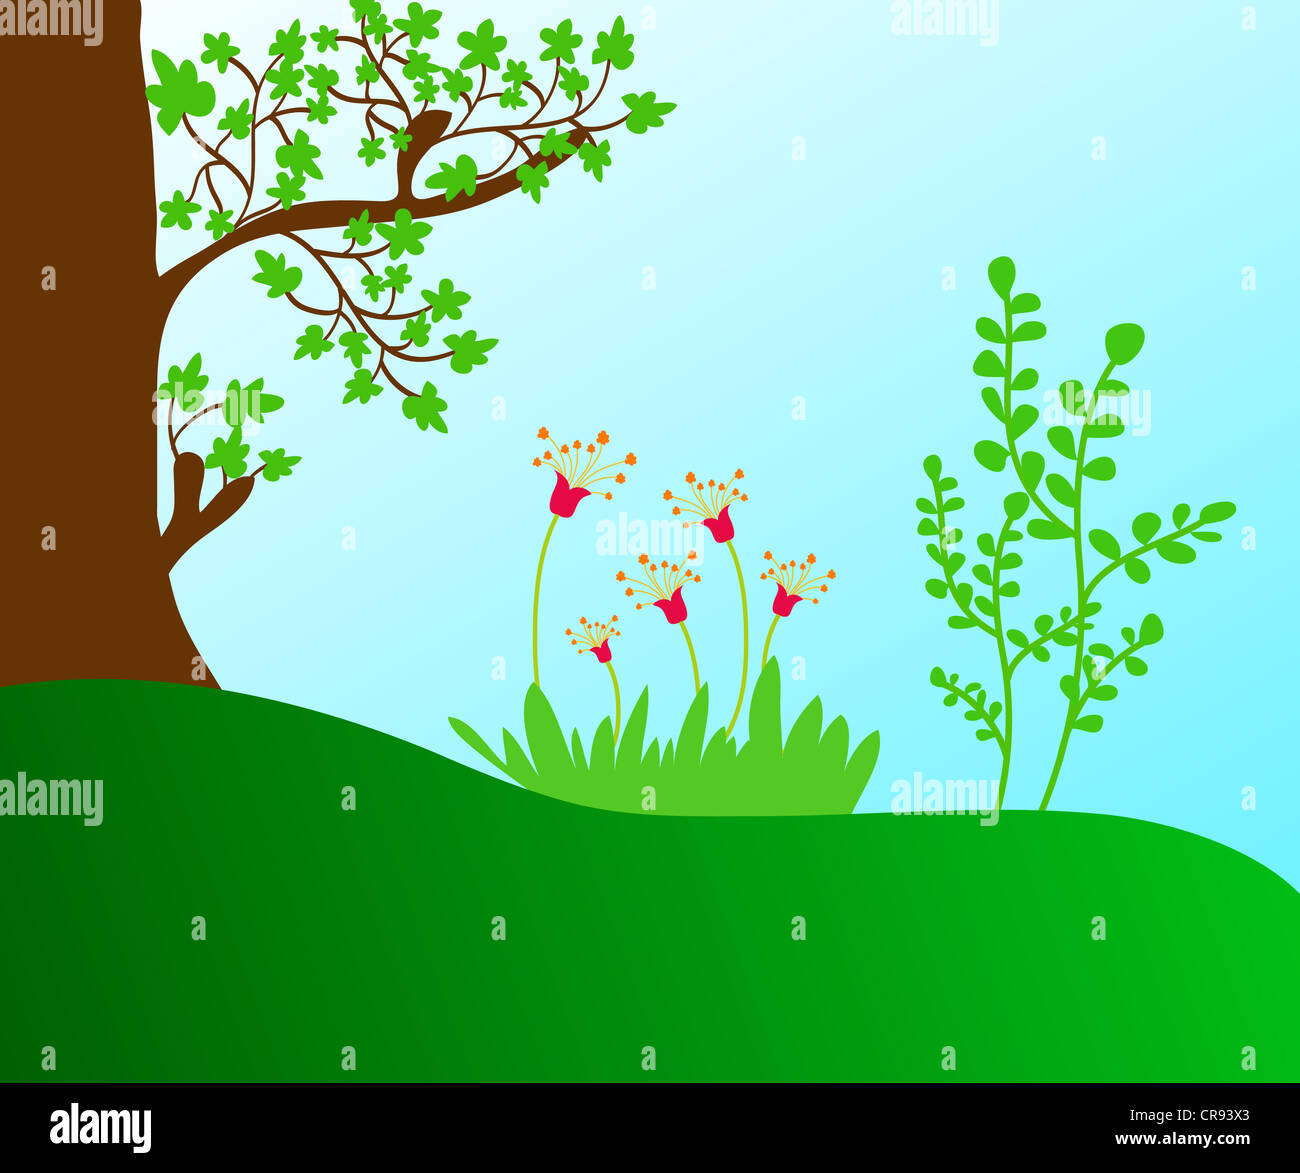 Trees and flowering plants illustration Stock Photo